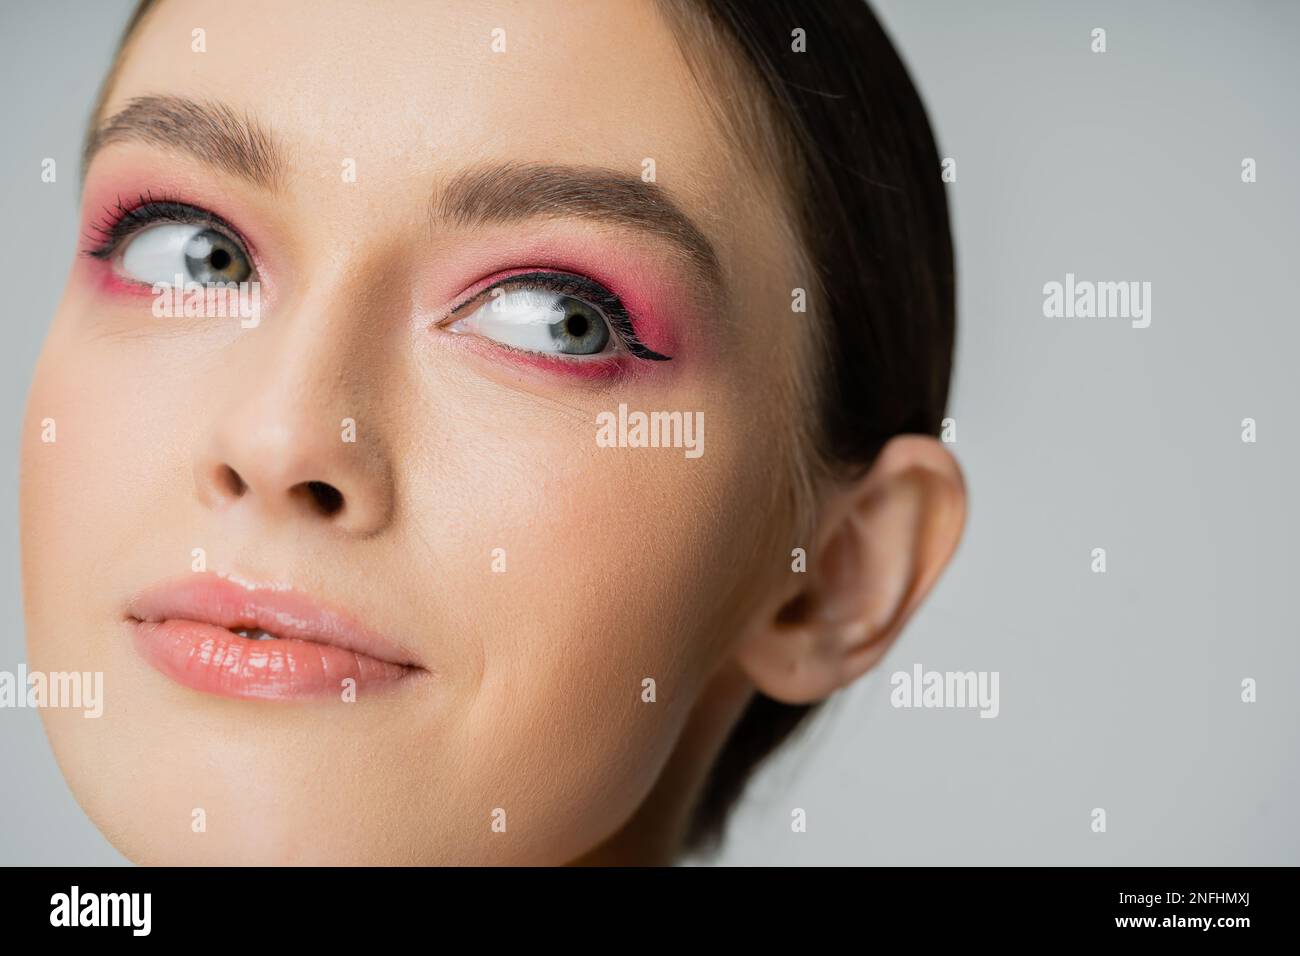 Close up view of woman with pink eye shadow and eye liner isolated on grey,stock image Stock Photo